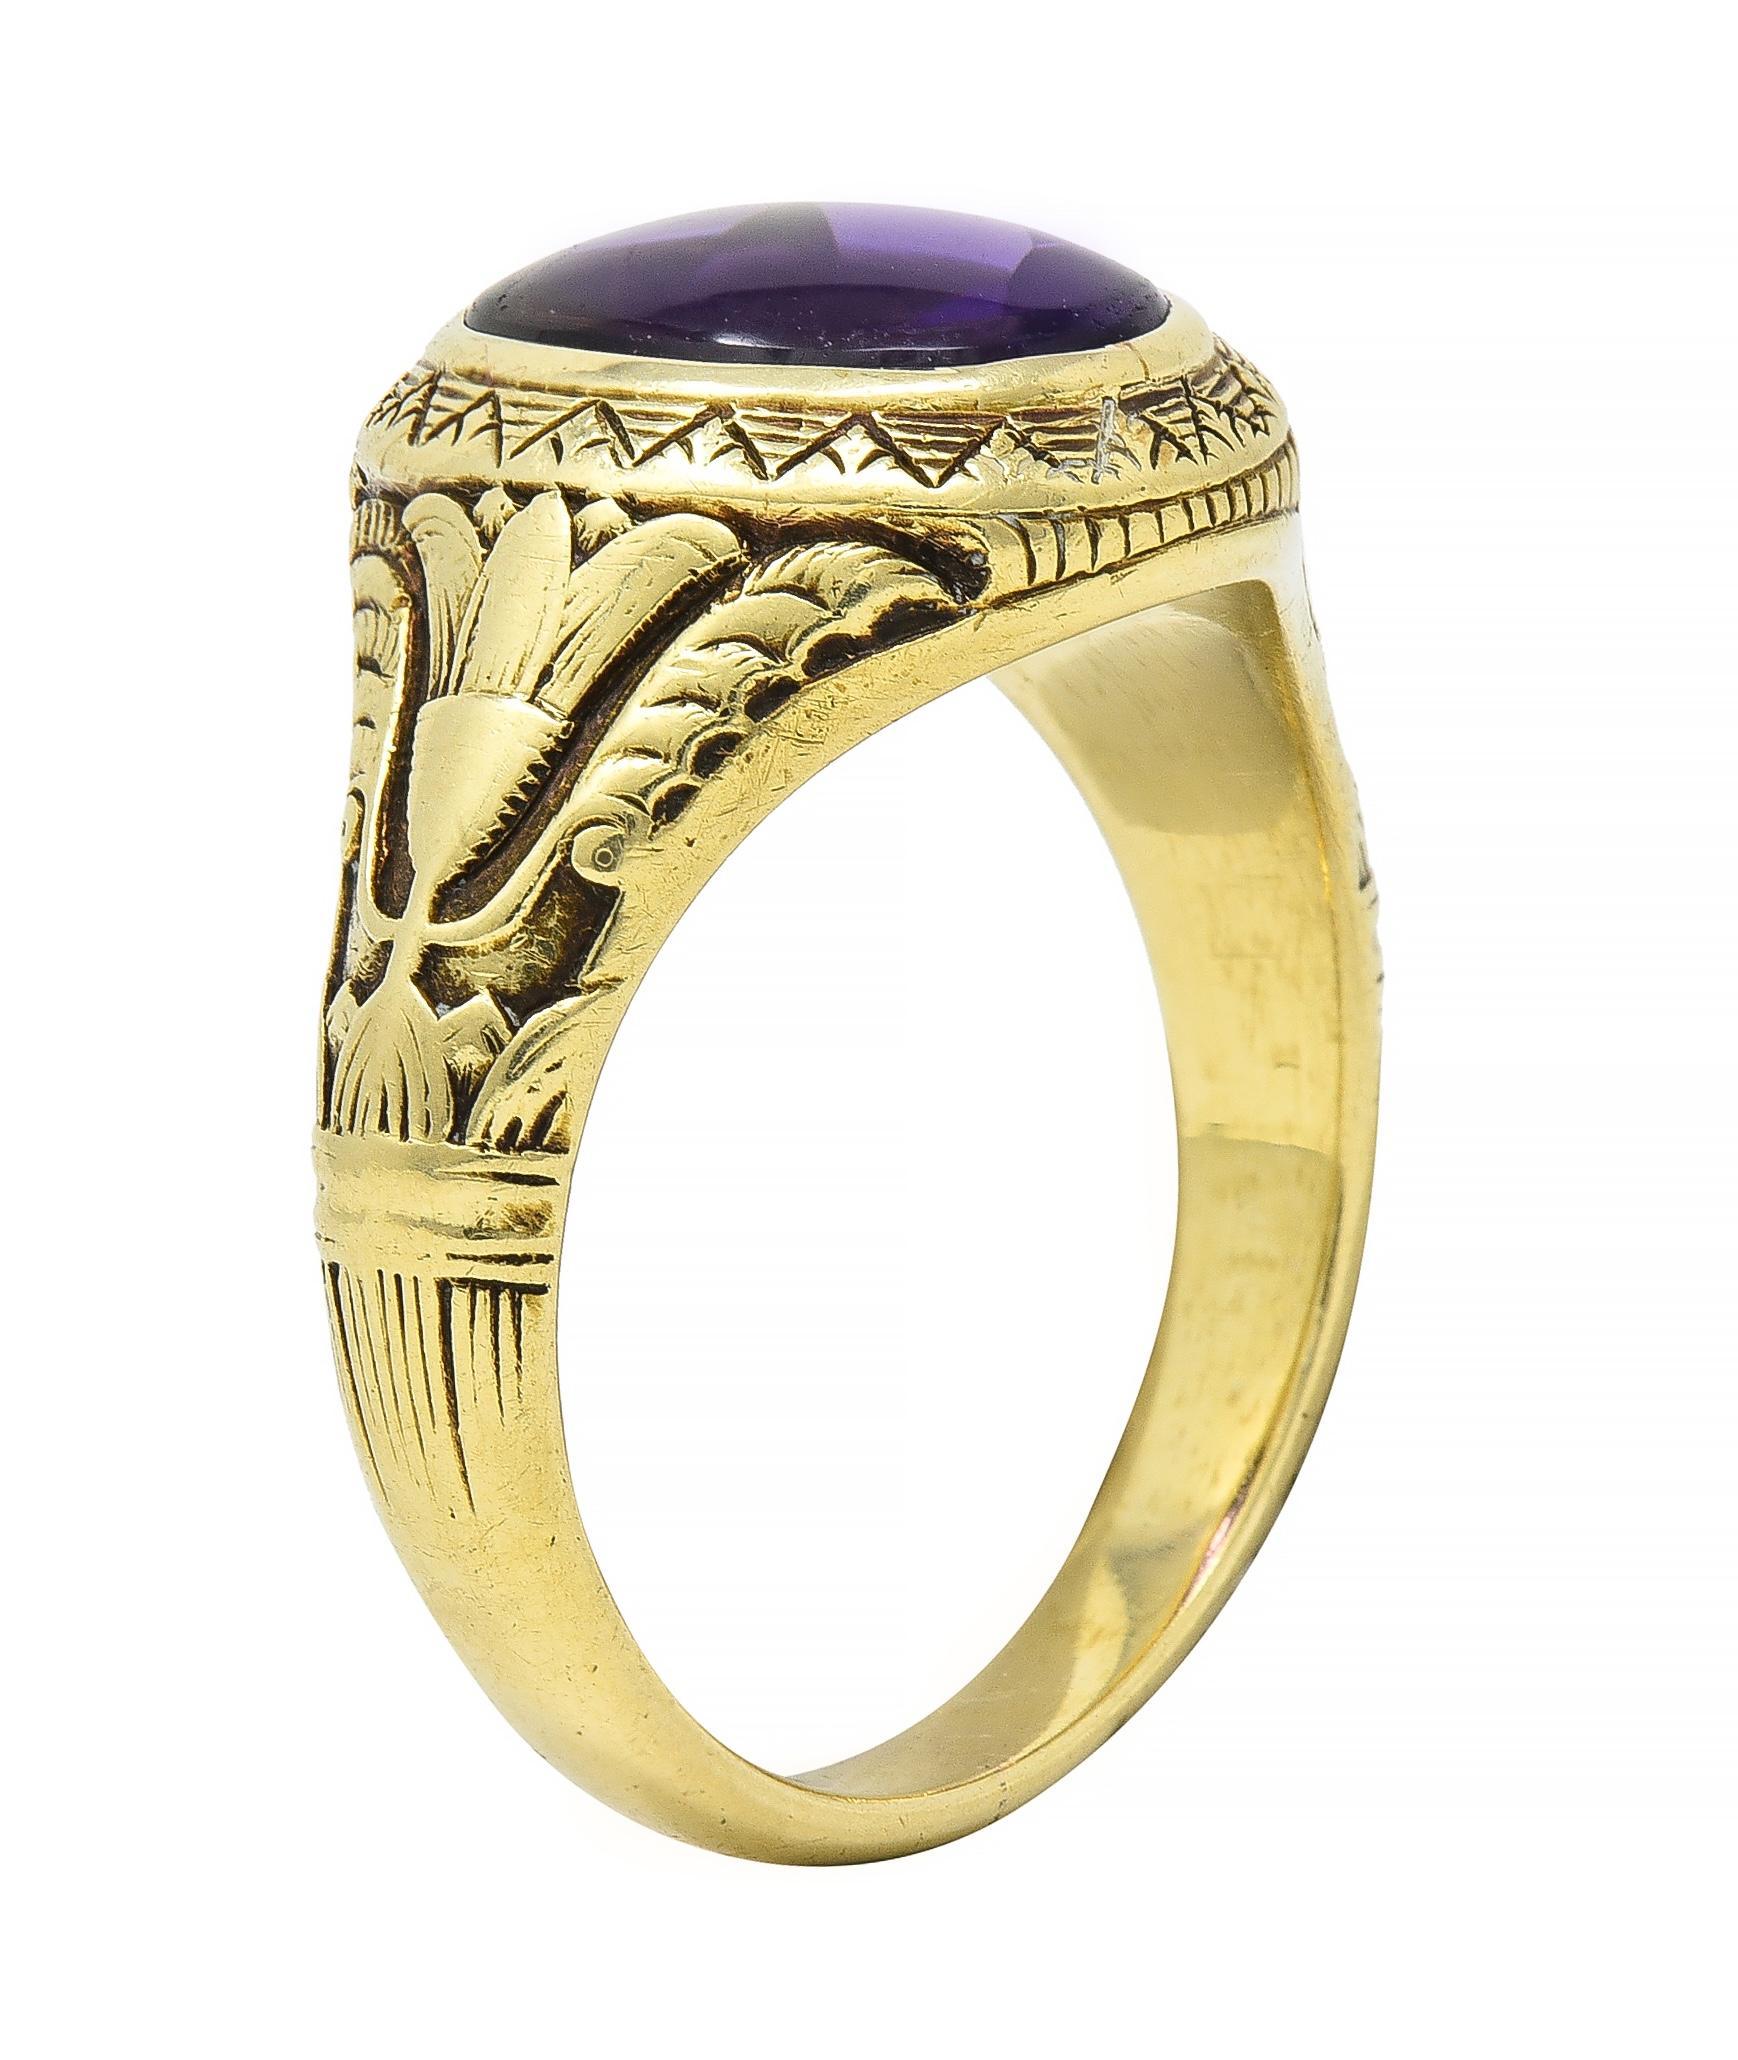 Signet style ring centers an oval amethyst measuring approximately 11.7 x 8.9 mm - translucent uniform purple
With a polished top and faceted pavilion
Bezel set in a deeply etched geometric pattern gold surround
Flanked by highly stylized lotus